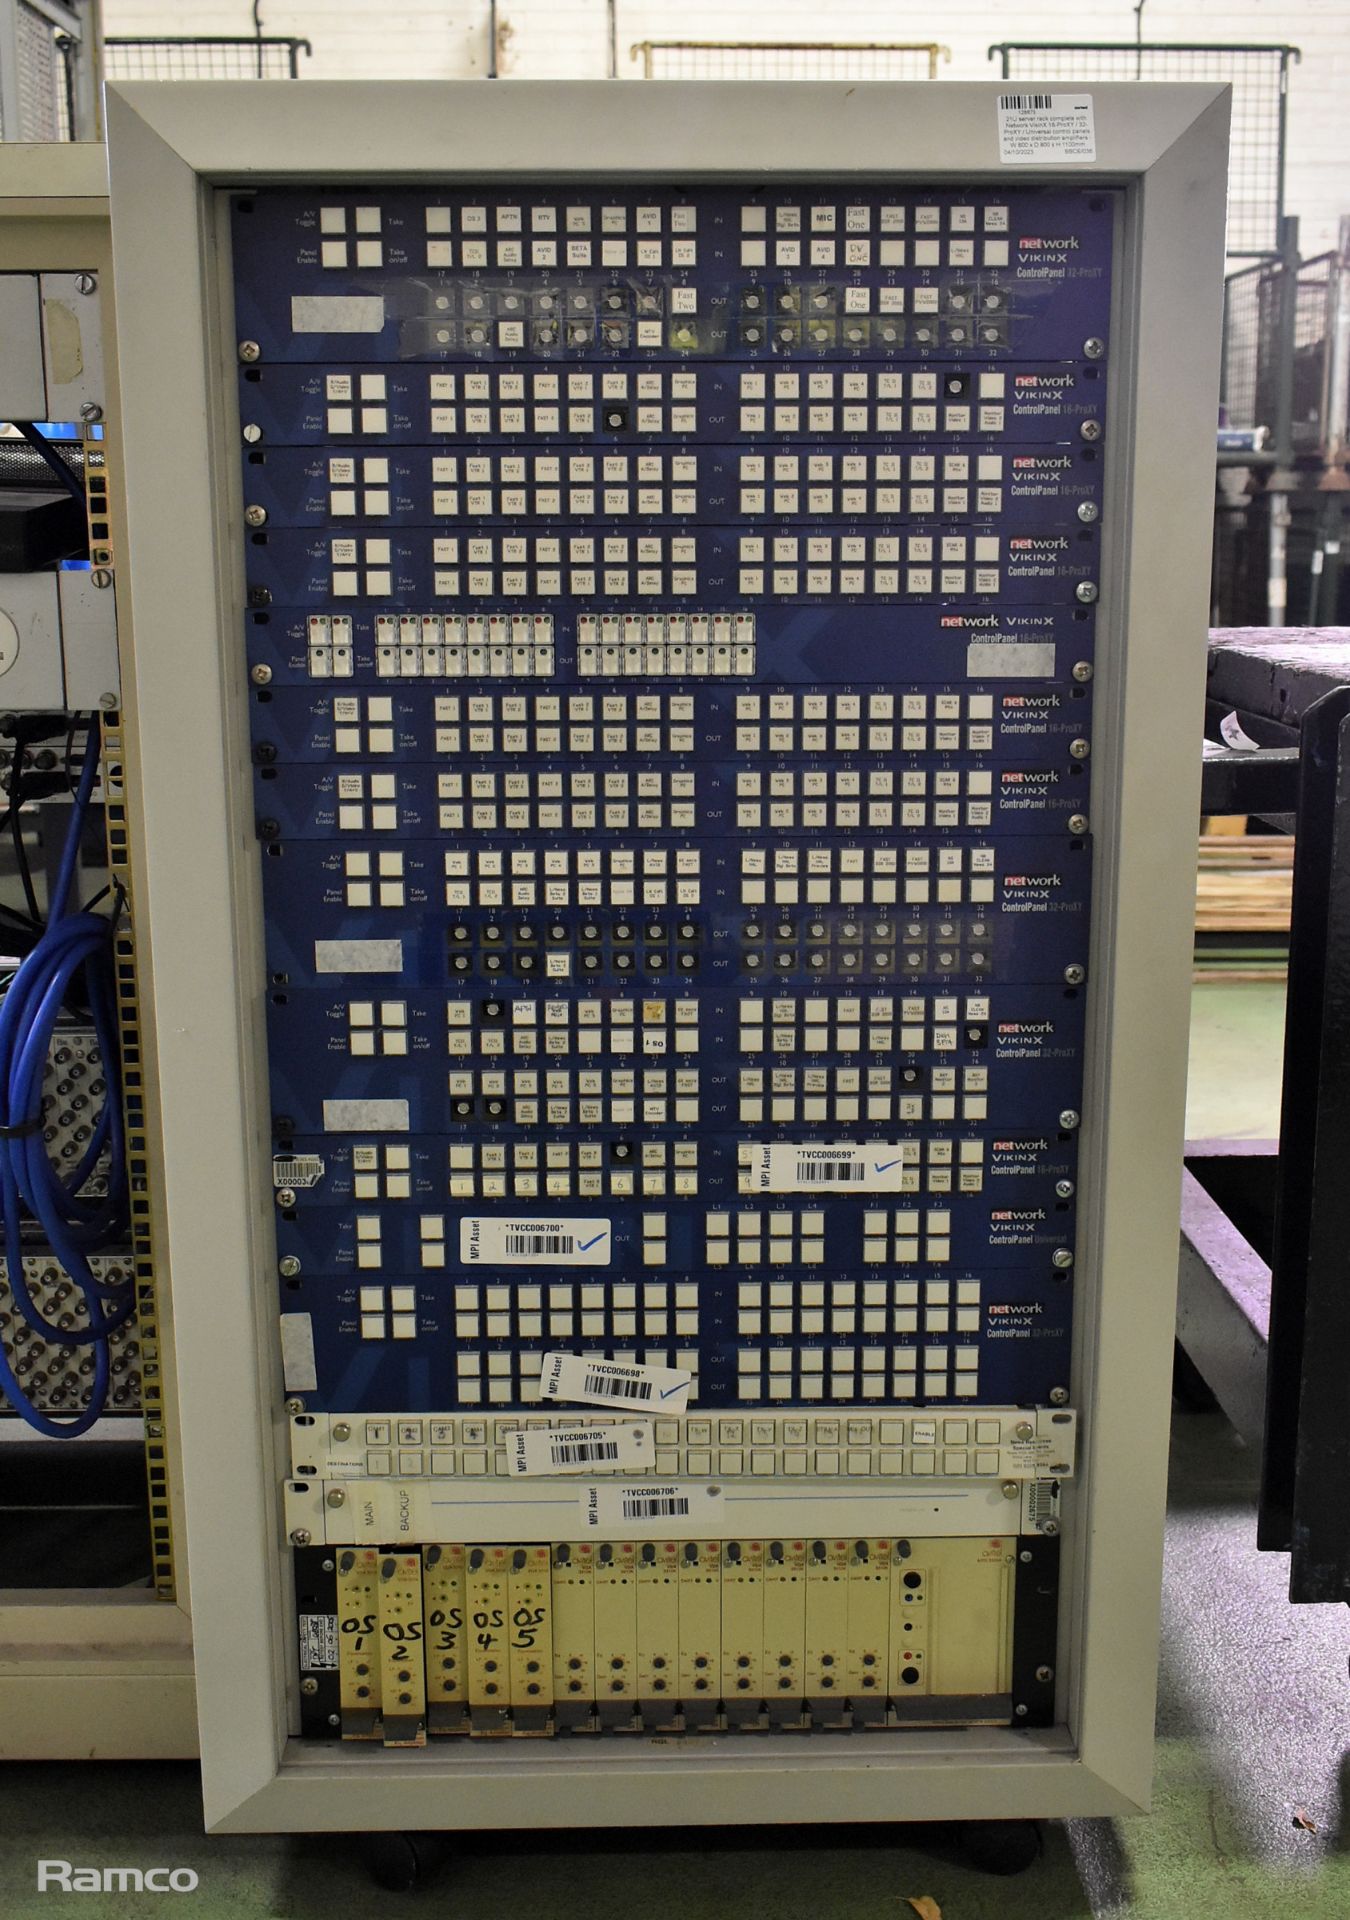 21U server rack complete with Network VikinX 16-ProXY / 32-ProXY / Universal control panels and more - Image 3 of 6